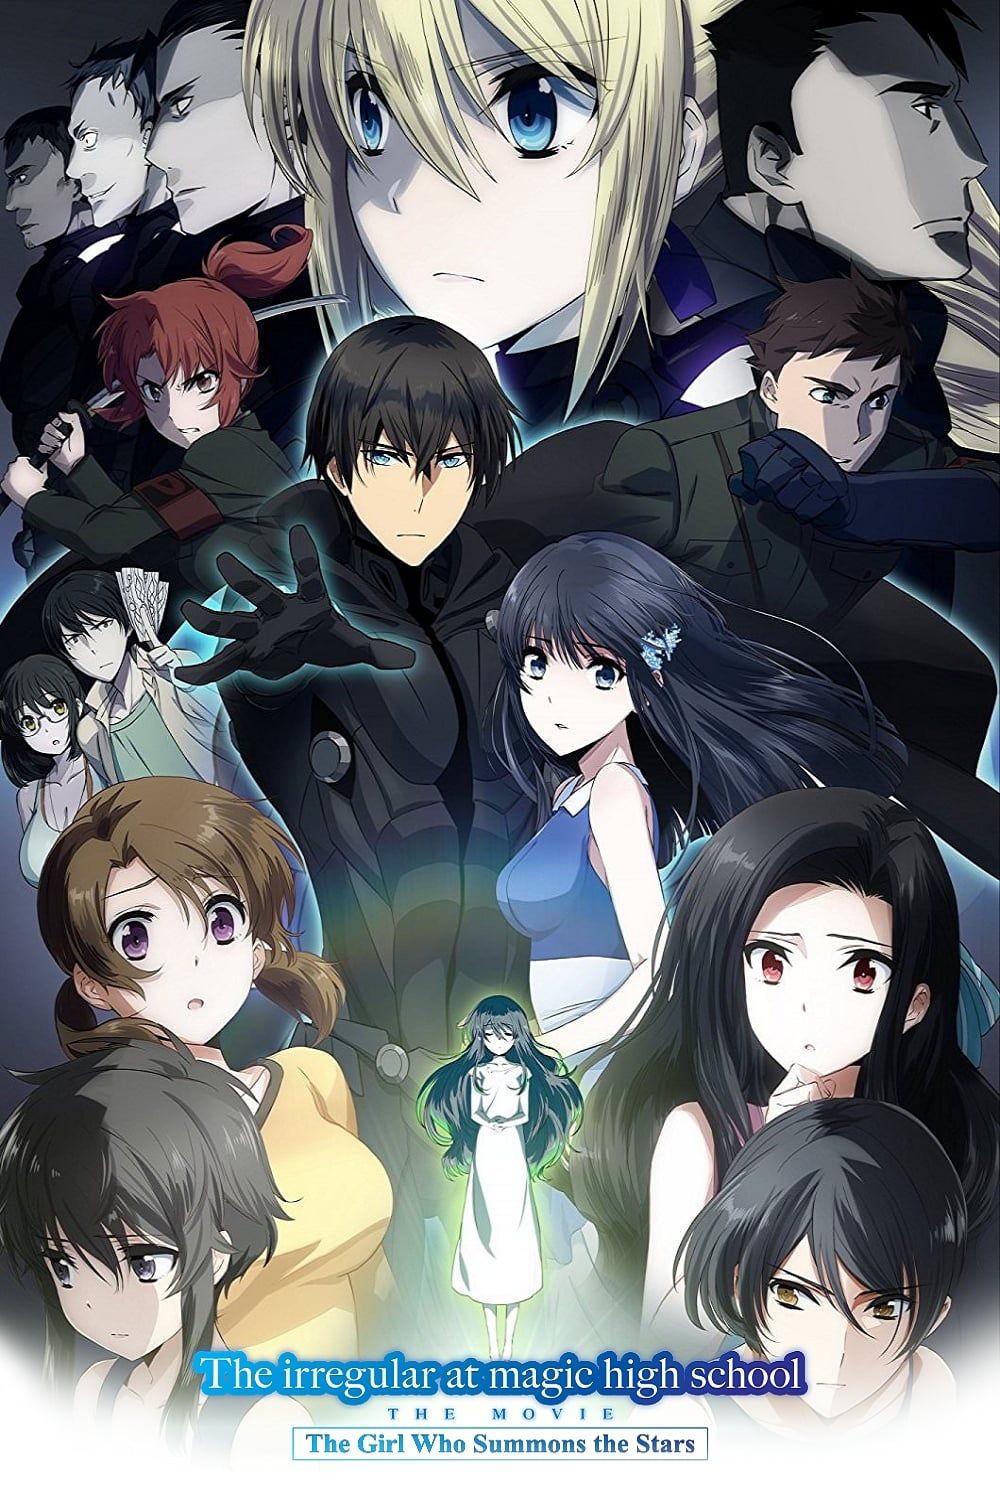 Call Of The Night Anime Release Date & Where To Watch Online?